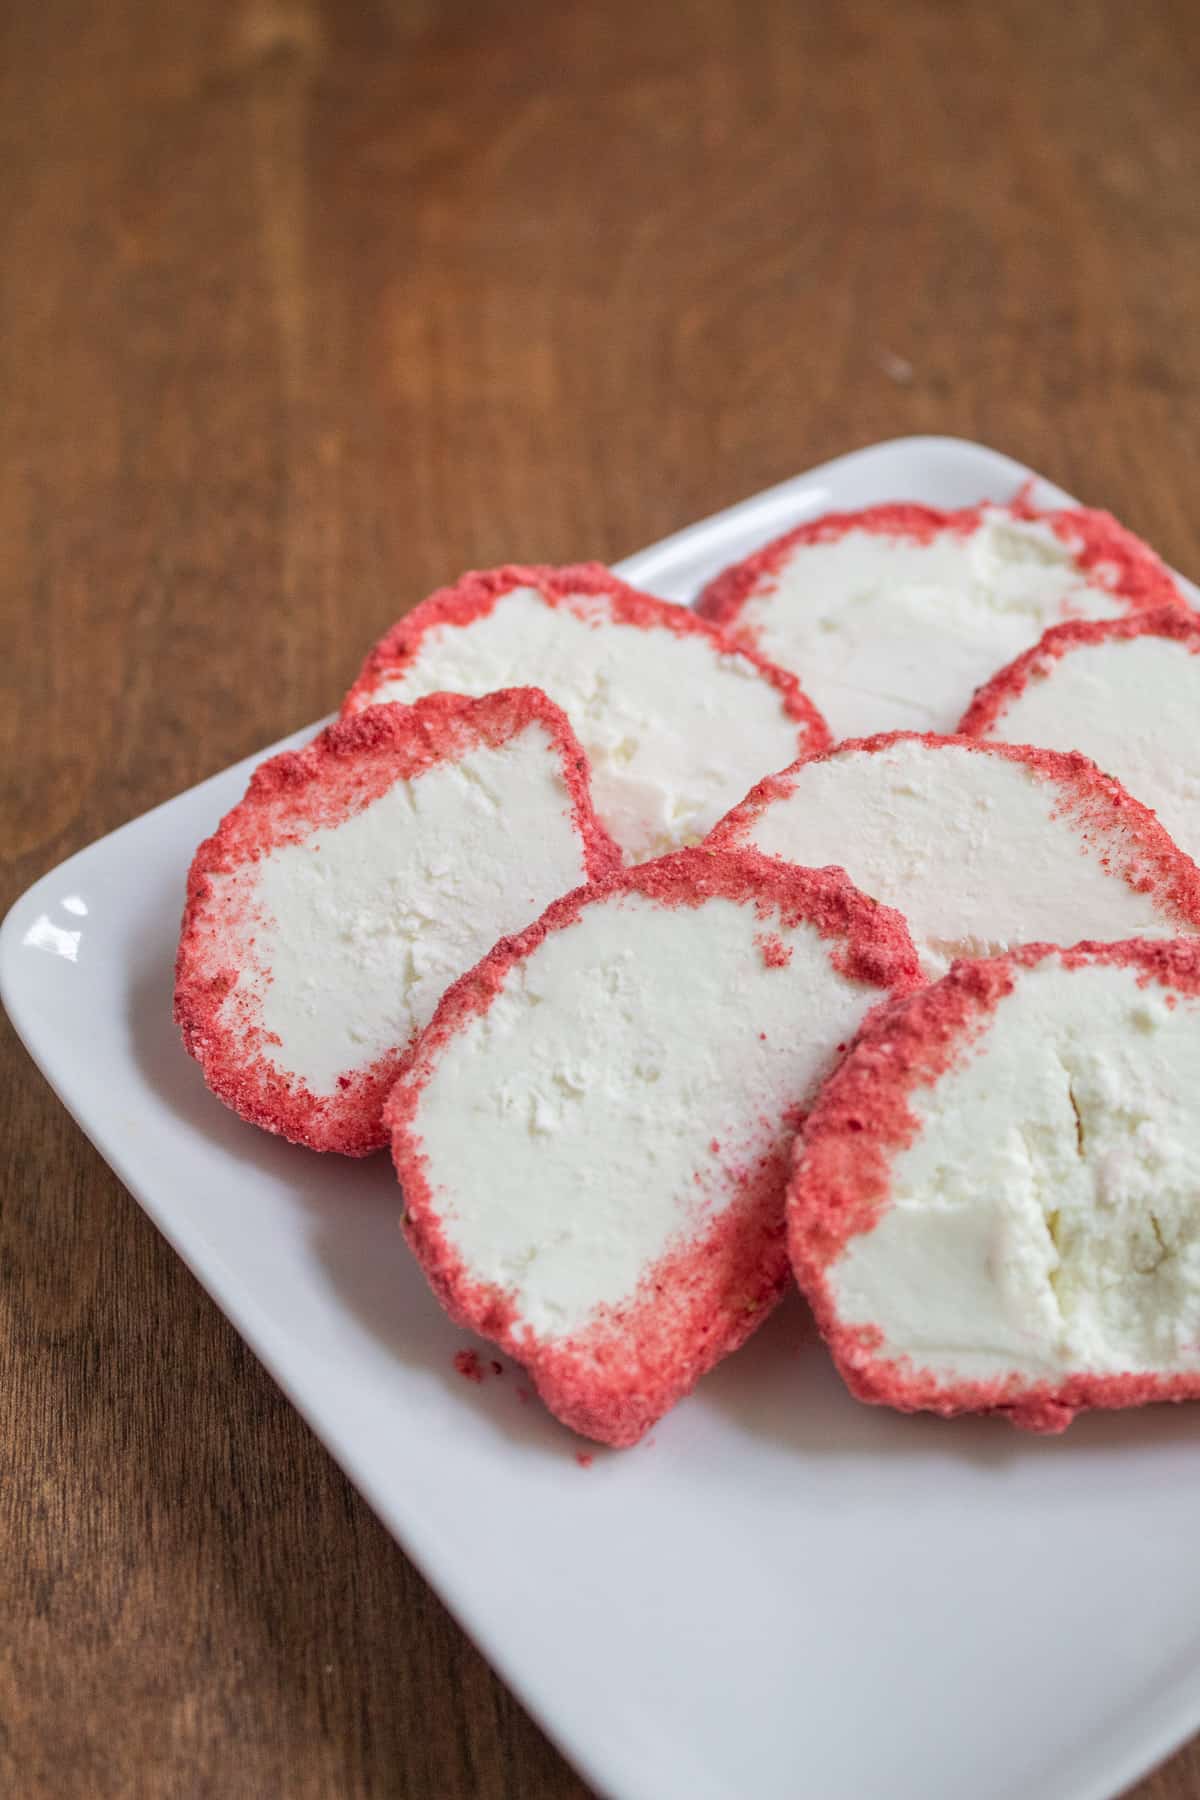 Goat cheese rounds are coated in a pink strawberry powder.